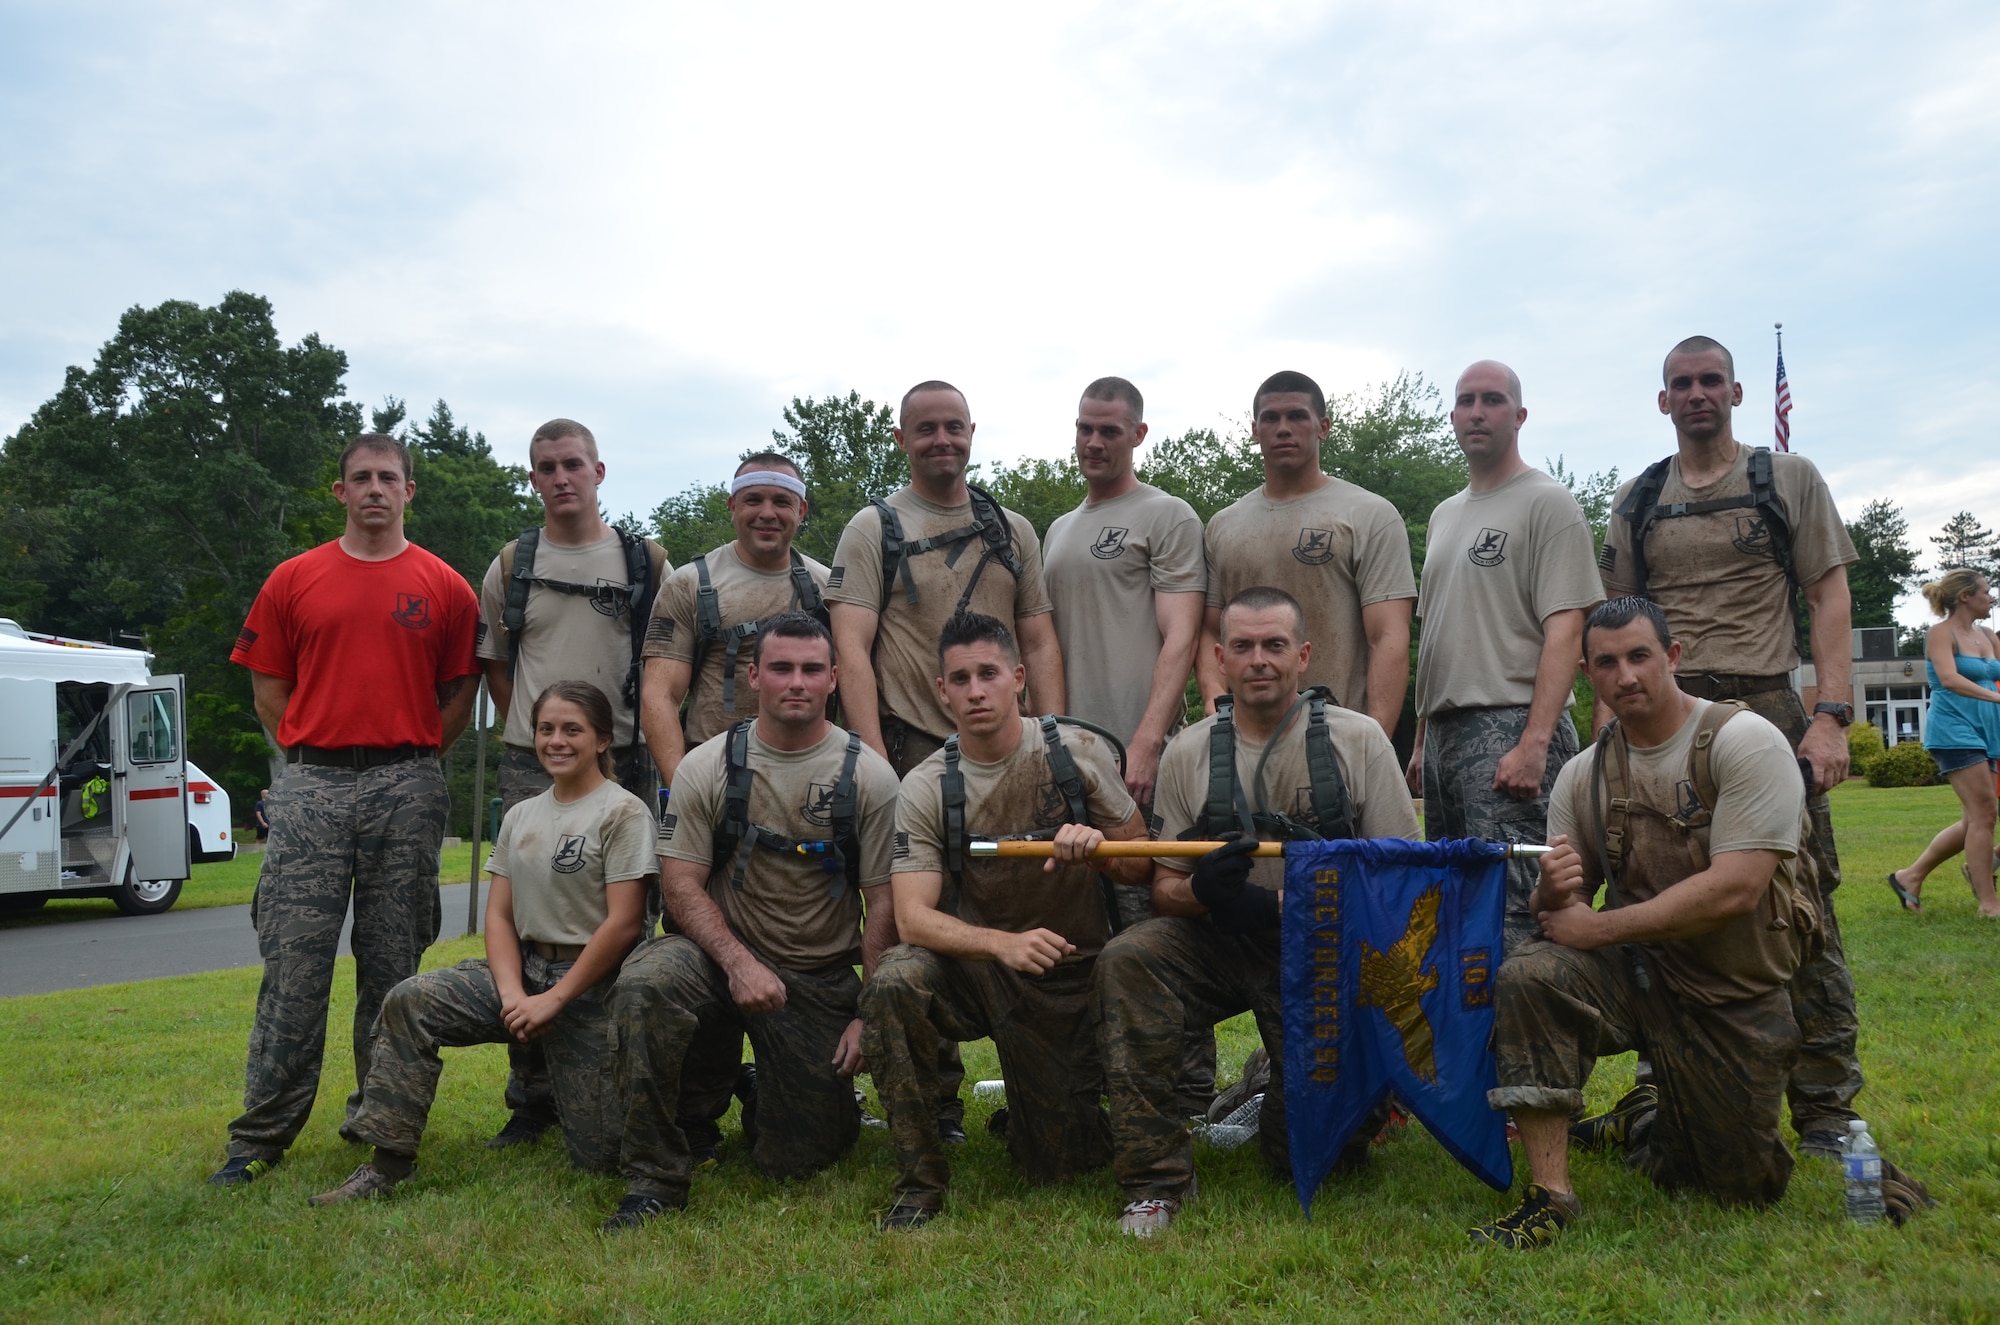 Members of the 103rd Security Forces Squadron emergency services team pose for a group shot at the Connecticut SWAT Challenge Aug. 22, 2013, West Hartford Reservoir, West Hartford, Conn. The Connecticut Air National Guard team grabbed eighth place overall, besting 20 other regional teams. (U.S. Air National Guard Photo by Master Sgt. Erin McNamara)